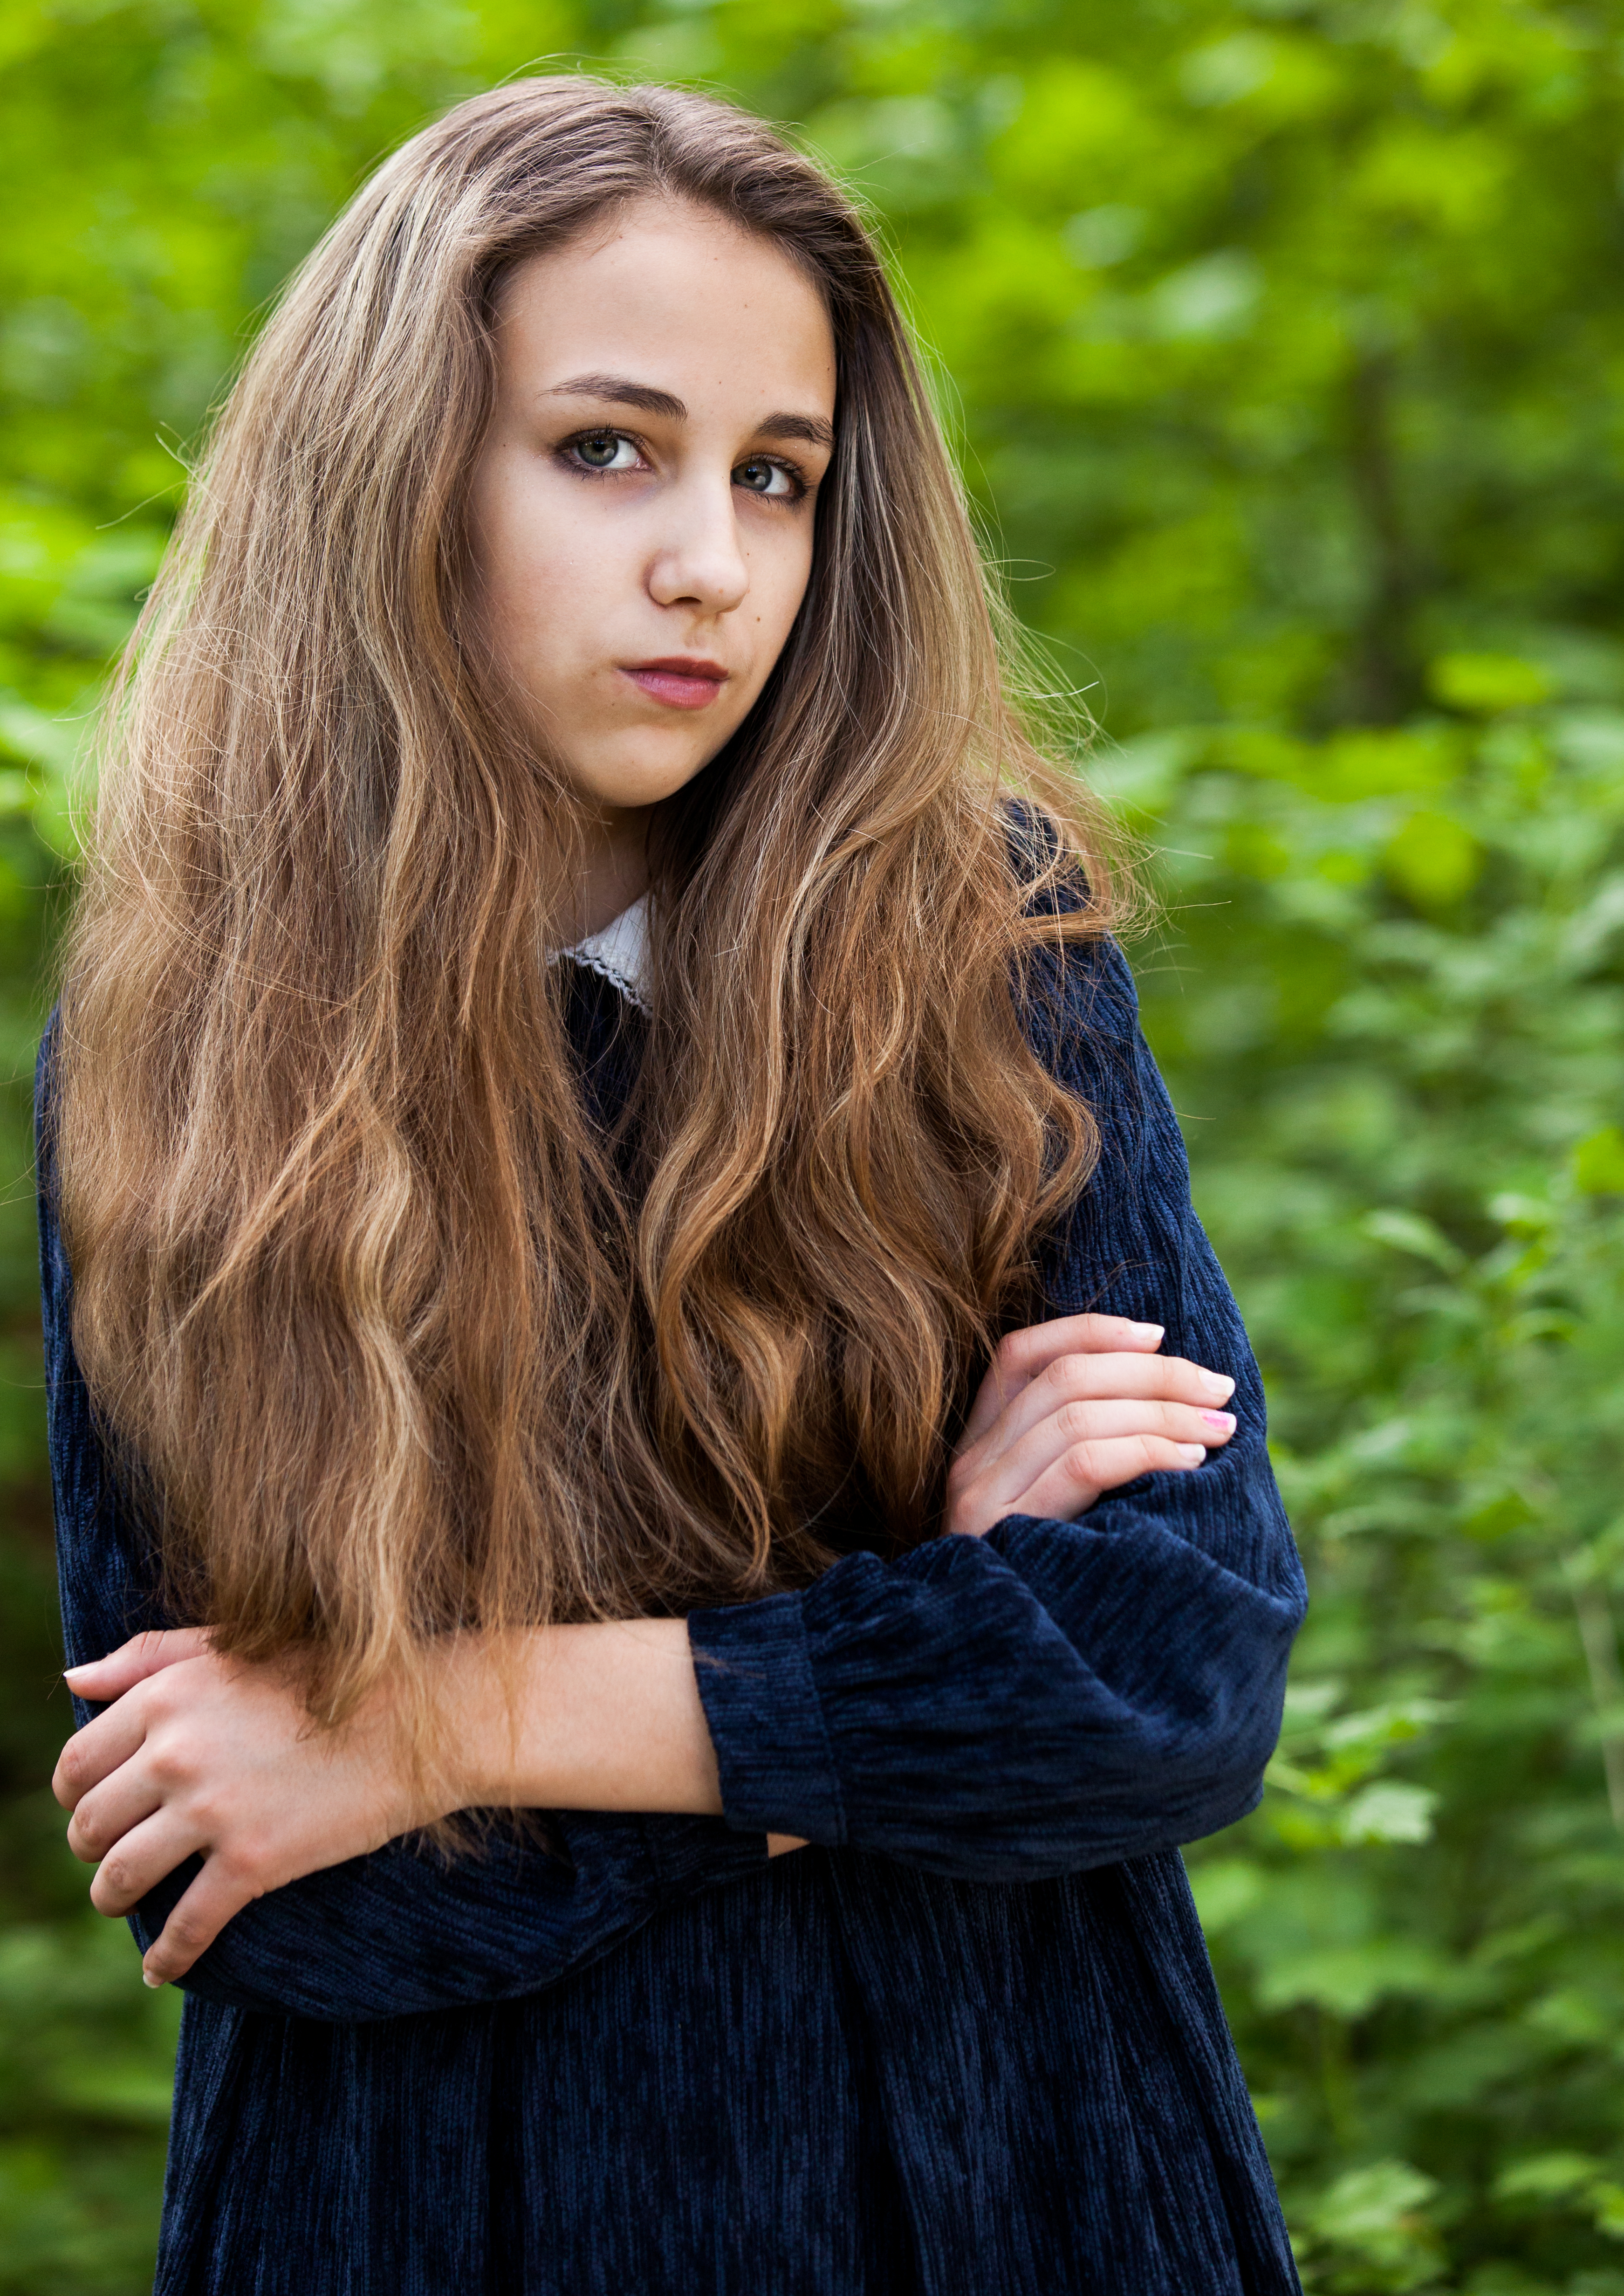 a 14-year-old Roman-Catholic girl in May 2015, picture 2